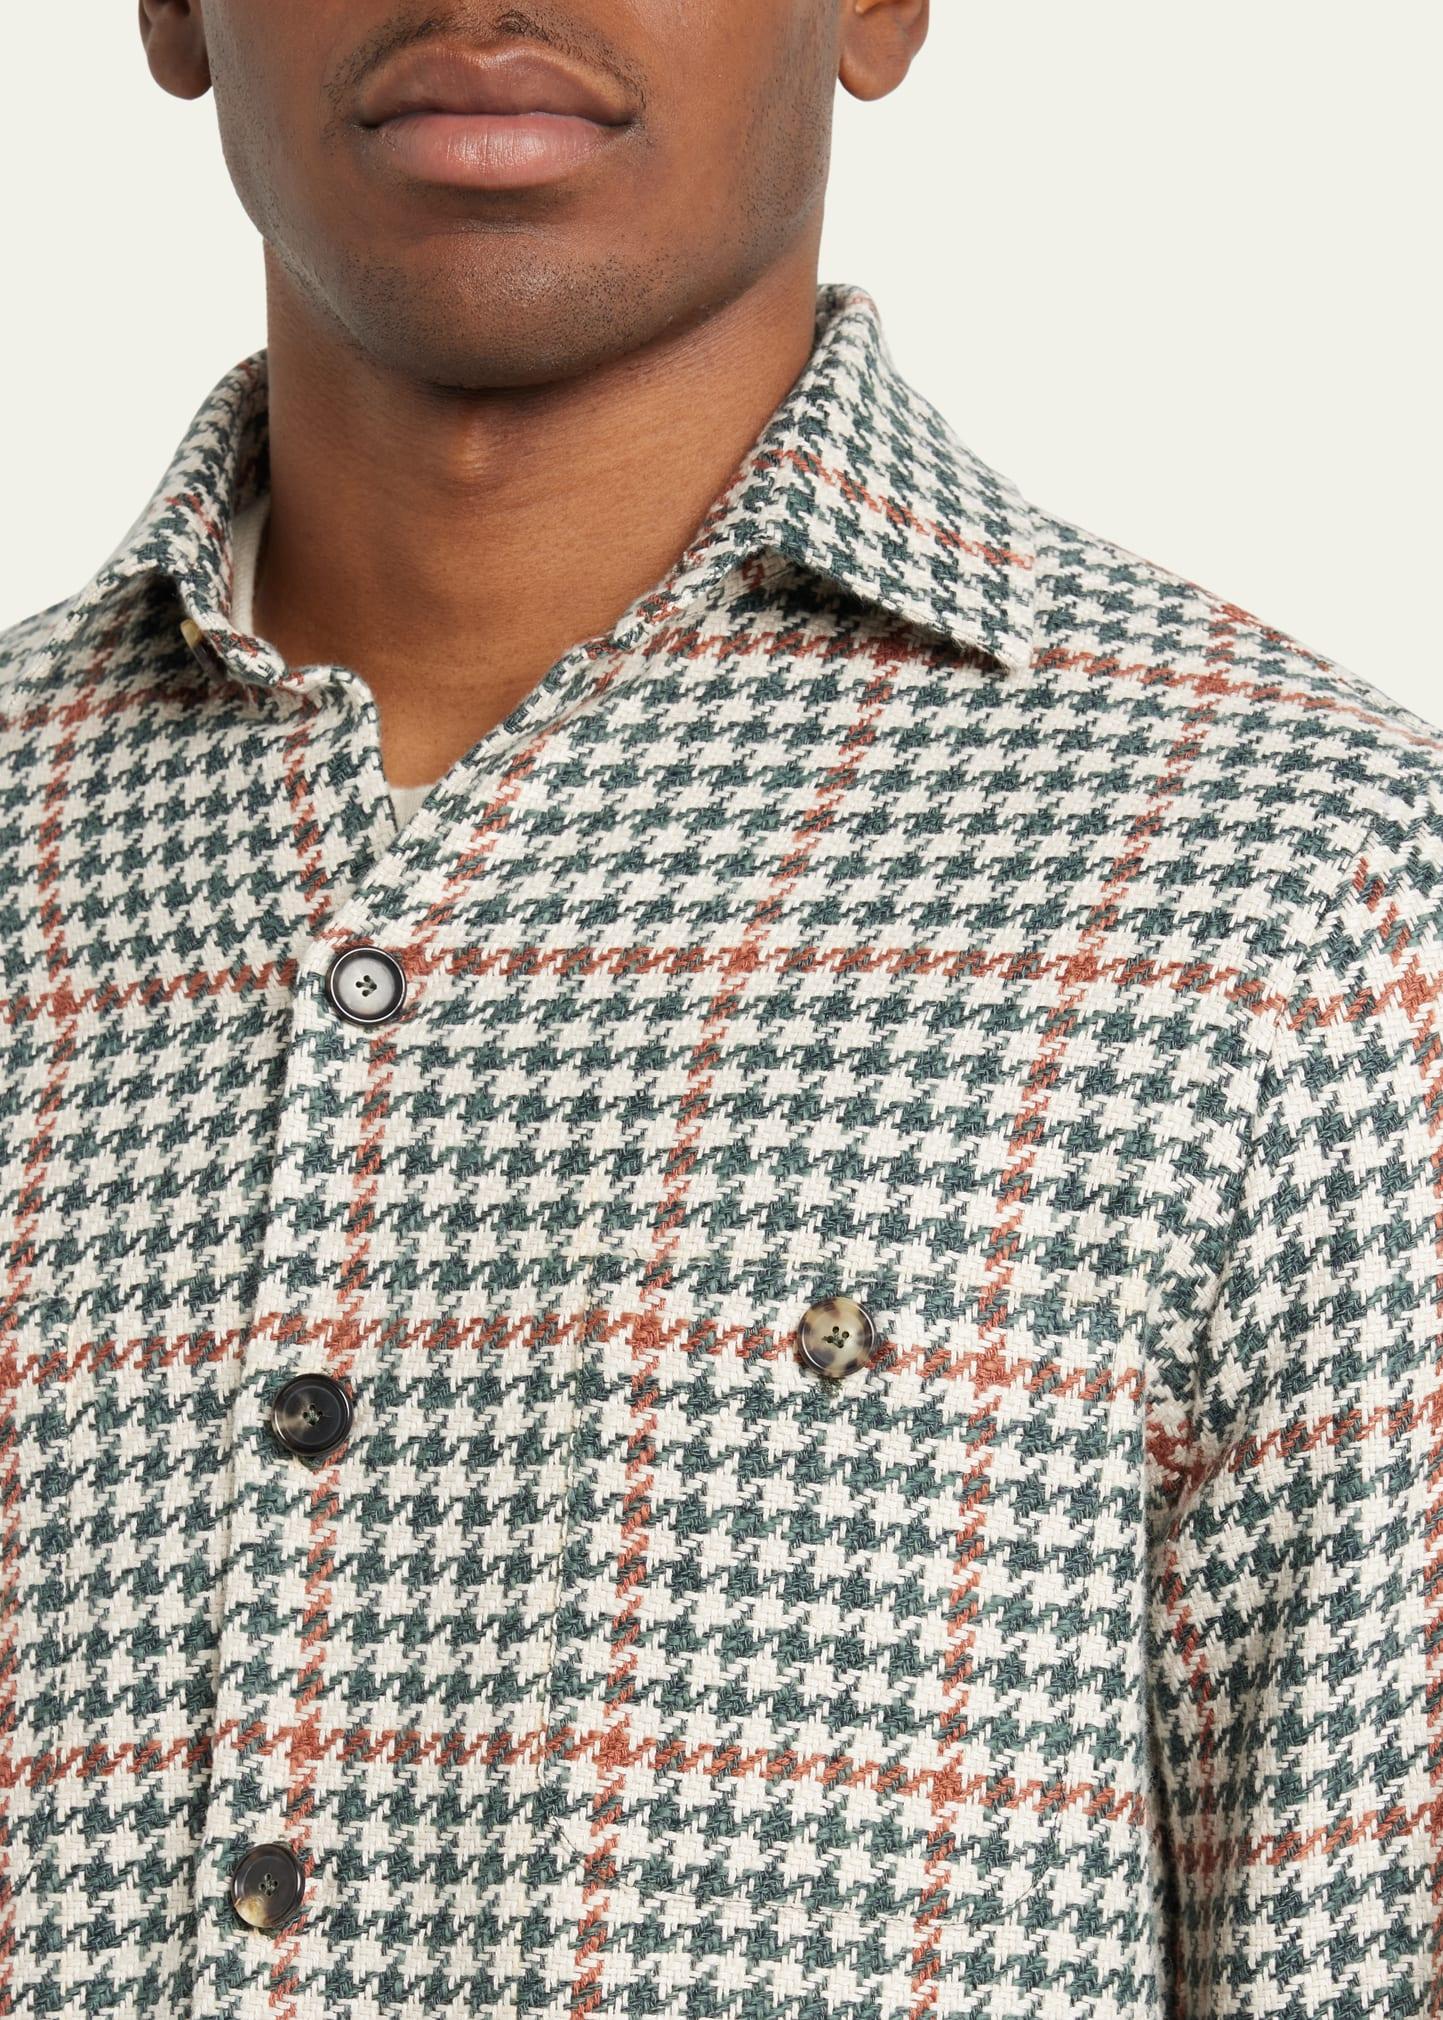 Cesare Attolini Houndstooth Overshirt in Natural for Men | Lyst